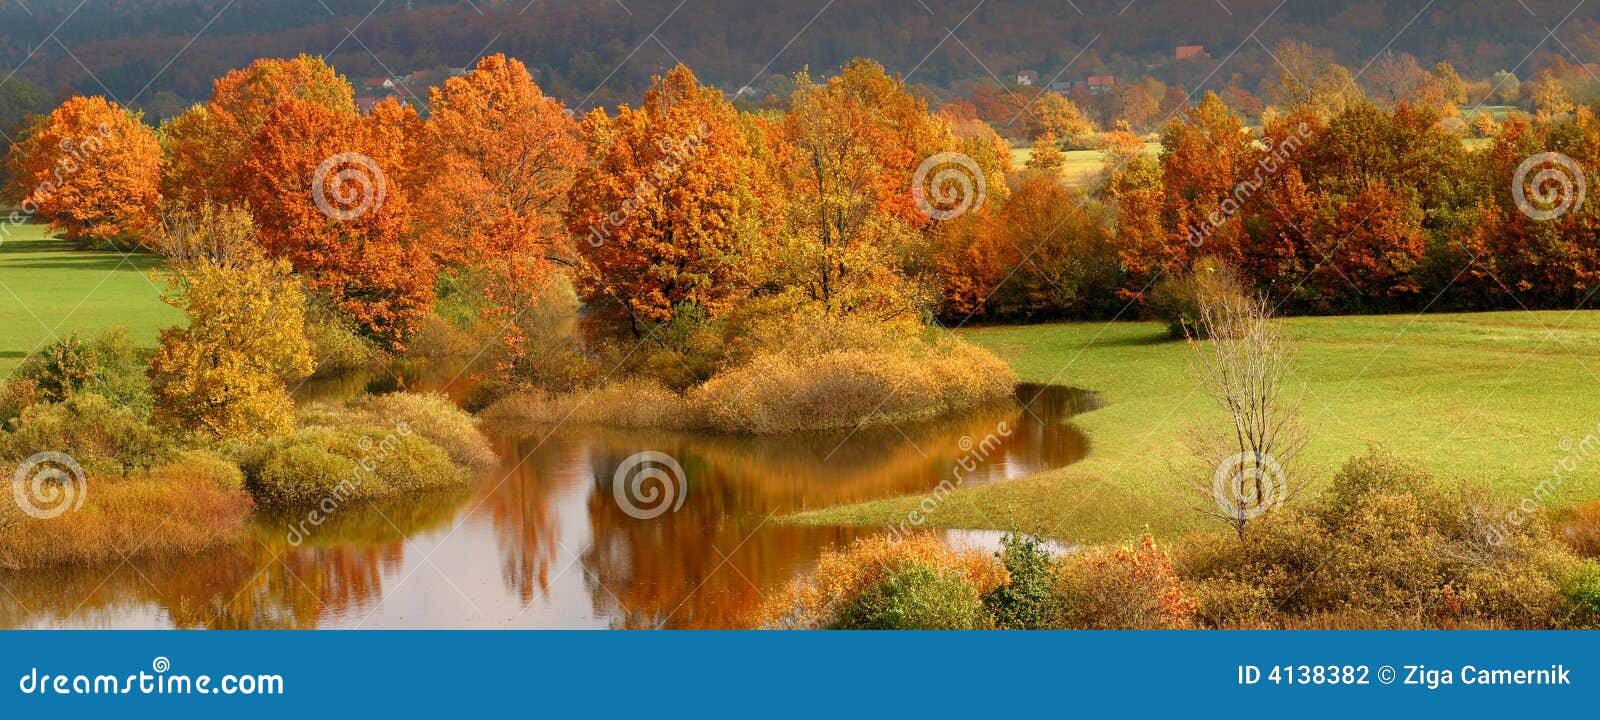 Autumn coloured trees stock photo. Image of tree, forest - 4138382